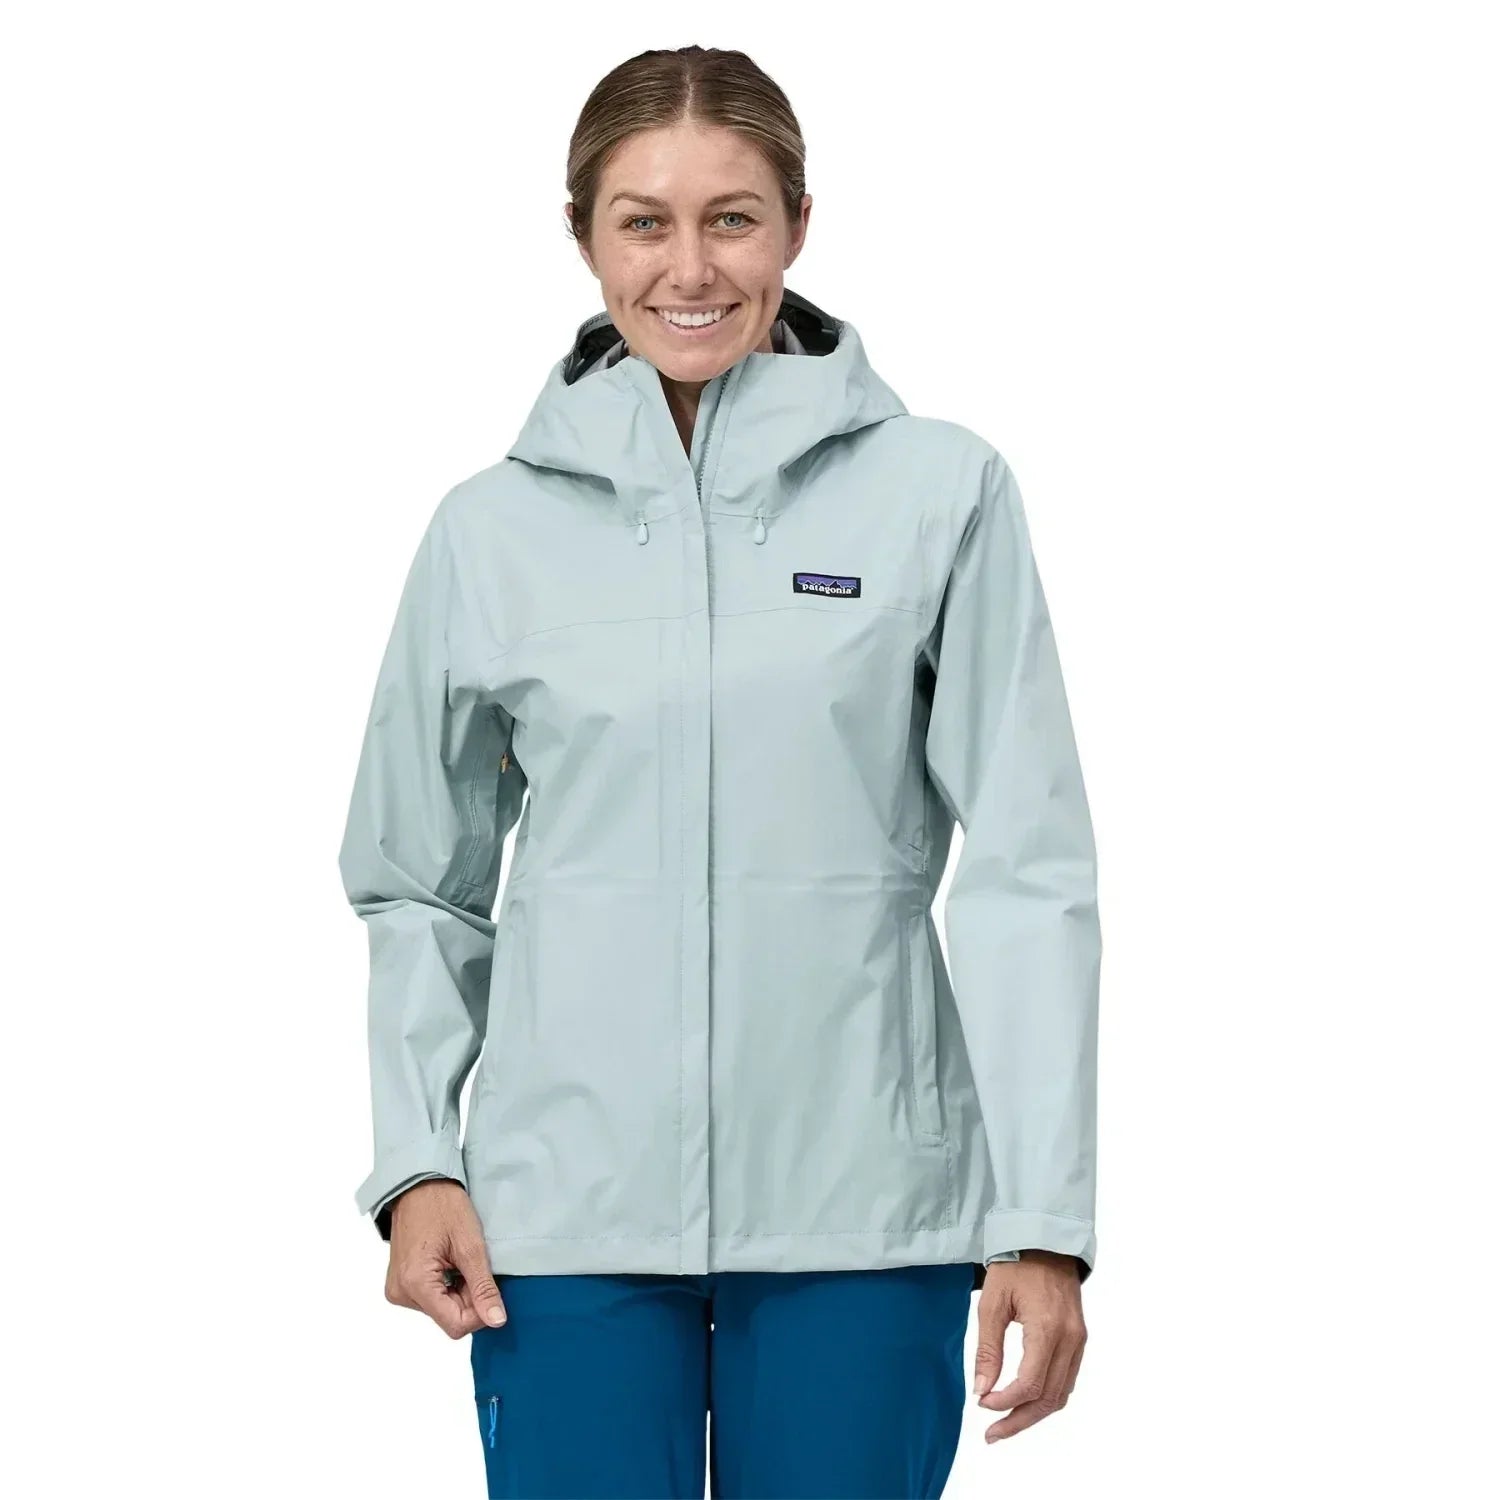 Patagonia 02. WOMENS APPAREL - WOMENS JACKETS - WOMENS JACKETS RAIN Women's Torrentshell 3L Jacket CHLE CHILLED BLUE